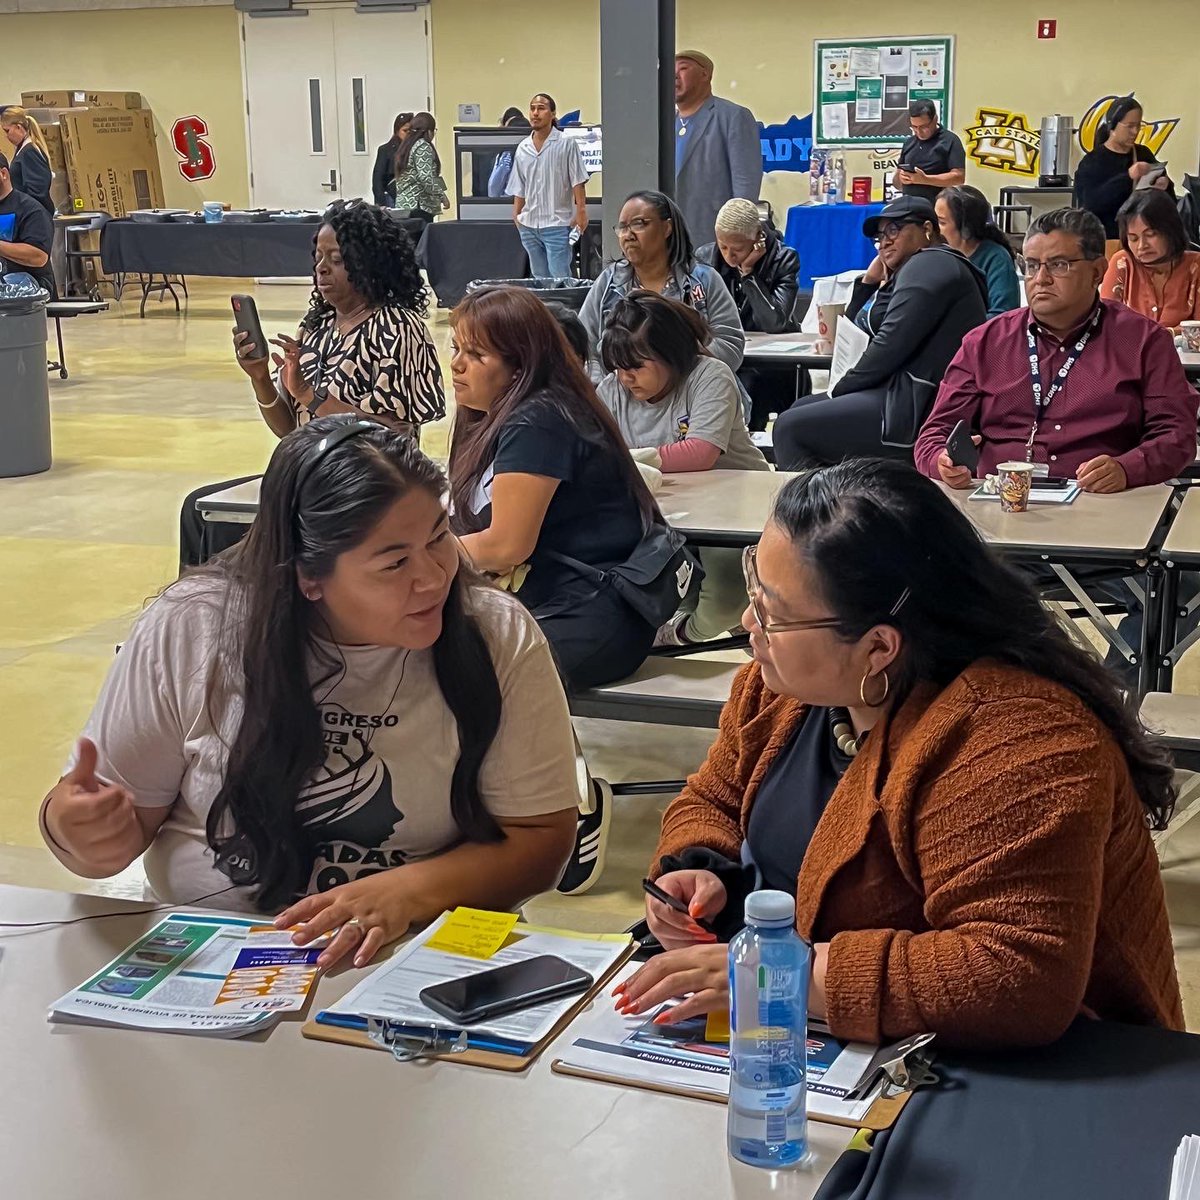 Thanks for joining the #LAHDAffordableHousing team, @currendpricejr, @hacla1938 and our community partners for an affordable housing workshop last night!

🔎 Miss the workshop but looking to learn more this #AffordableHousingMonth? Visit lahousing.lacity.org/AAHR.